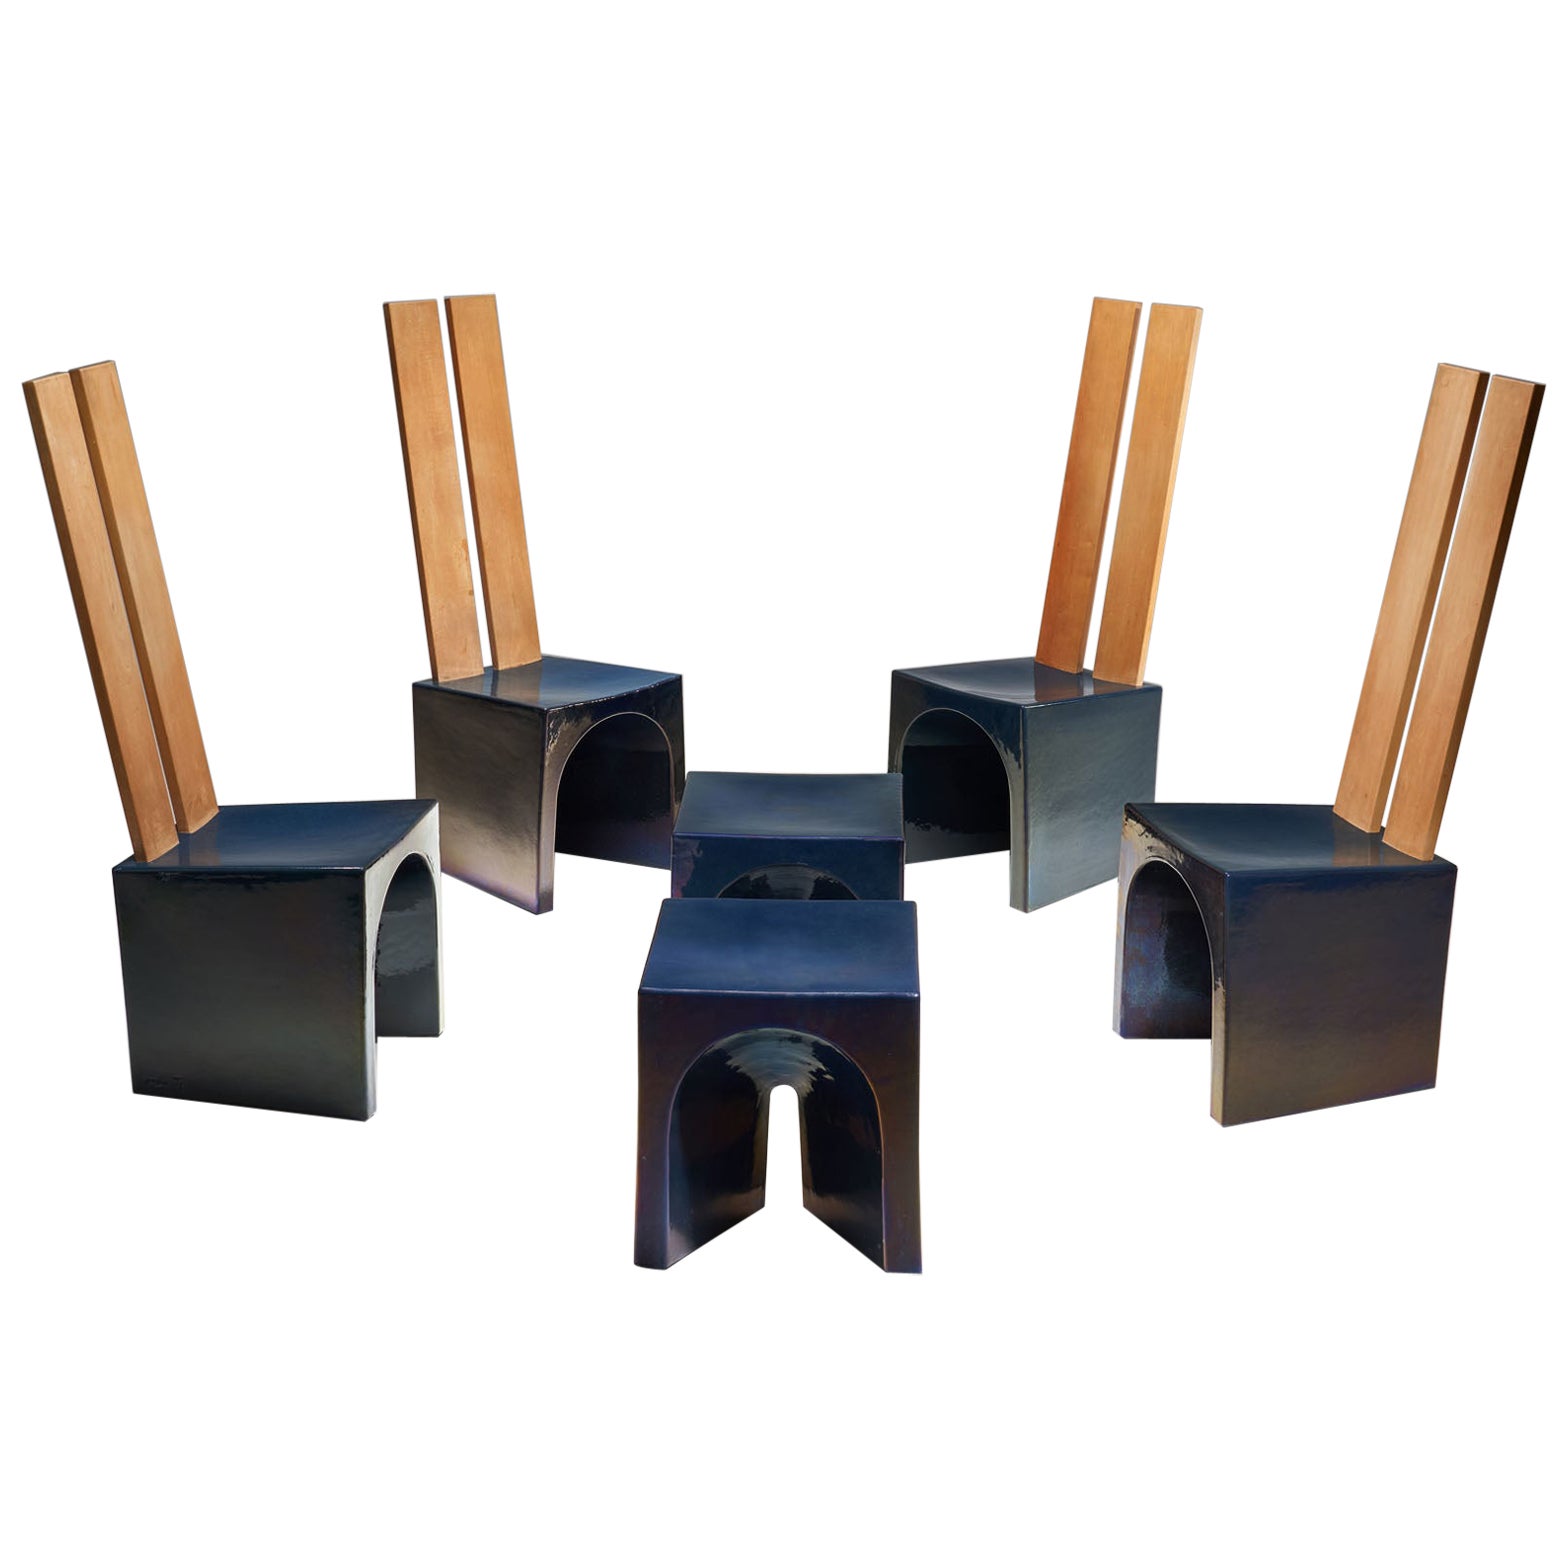 Tom Bruinsma Glazed Chairs and Tables, the Netherlands, Ca 1980s For Sale